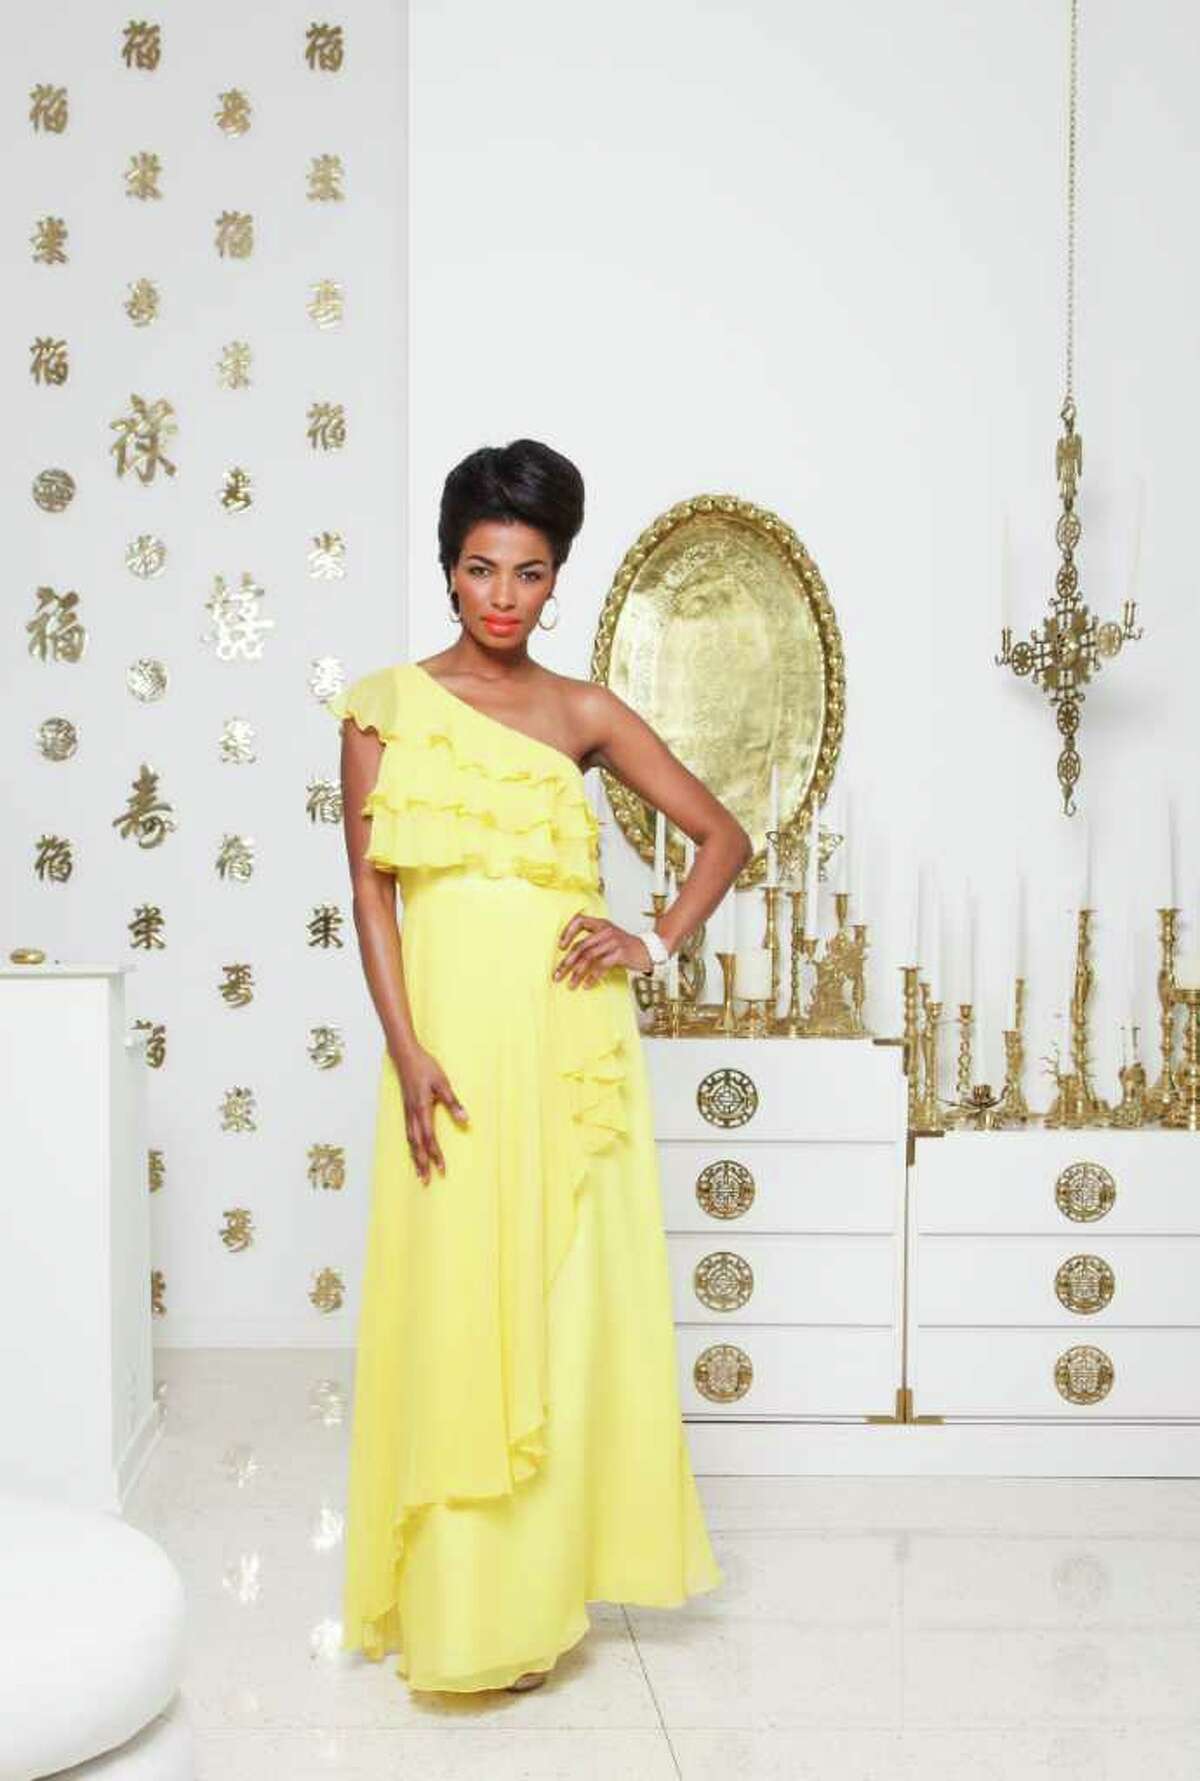 1. Clanay Wheeler of Neal Hamil Agency is wearing a yellow Jill Stuart dress, $398, with a Natasha rhinestone ring, $58, and earrings, $24; All from Dillard's. Her bracelet is Alexis Bittar, $295, from Neiman Marcus. Shoes are by Pelle Moda, $xx, Dillard's. Fashion styling by Wendy Norwood. Makeup by Tanya Robertson. Hair by Gayla Belay-Iyamu. Wednesday, Feb. 29, 2012, in Houston. ( Michael Paulsen / Houston Chronicle )